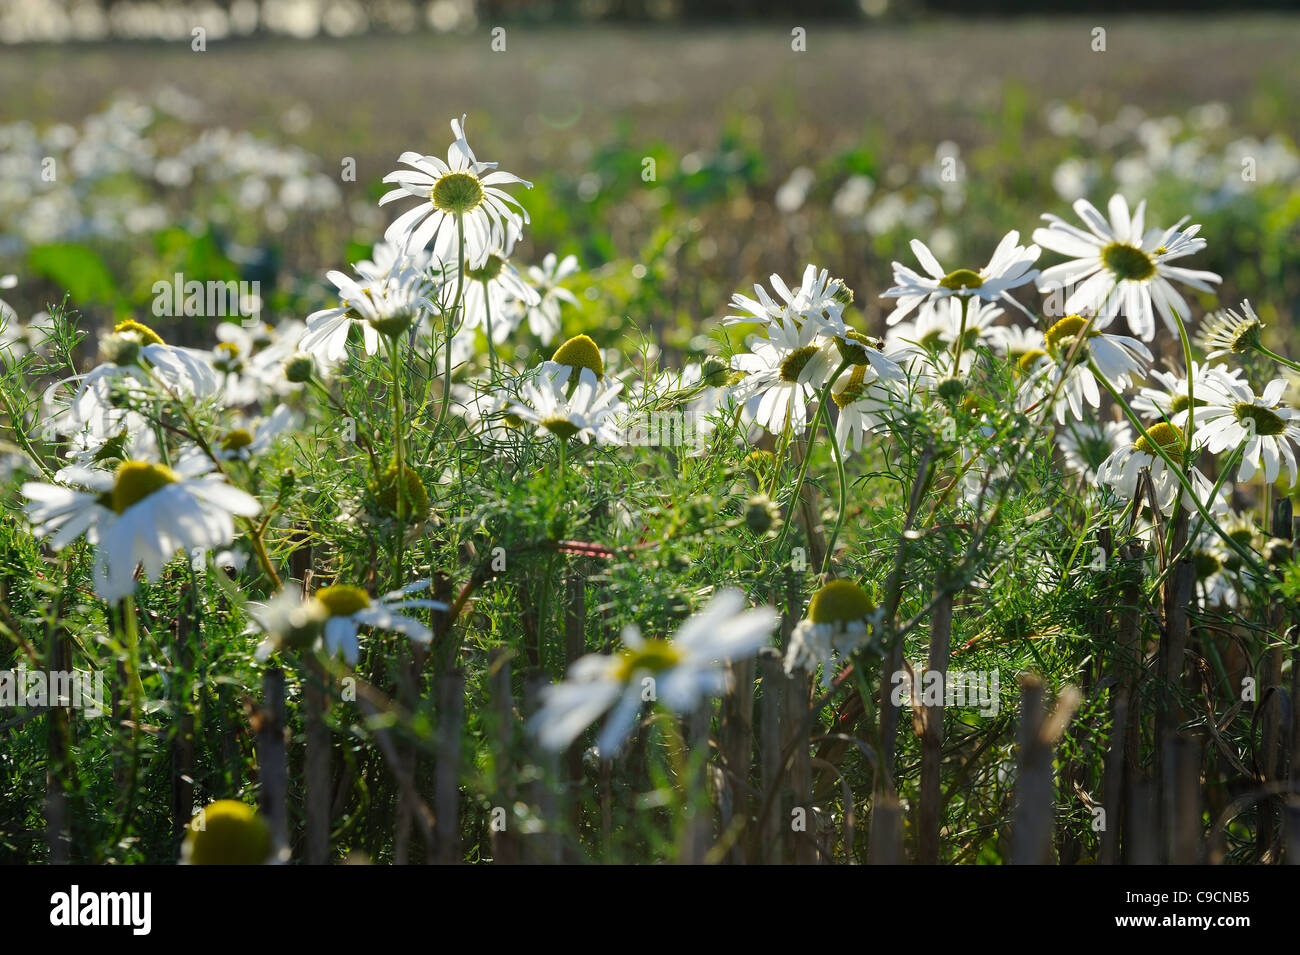 Arable weed, Scentless Mayweed, matricaria perforata, growing on stubble field headland, UK, October Stock Photo